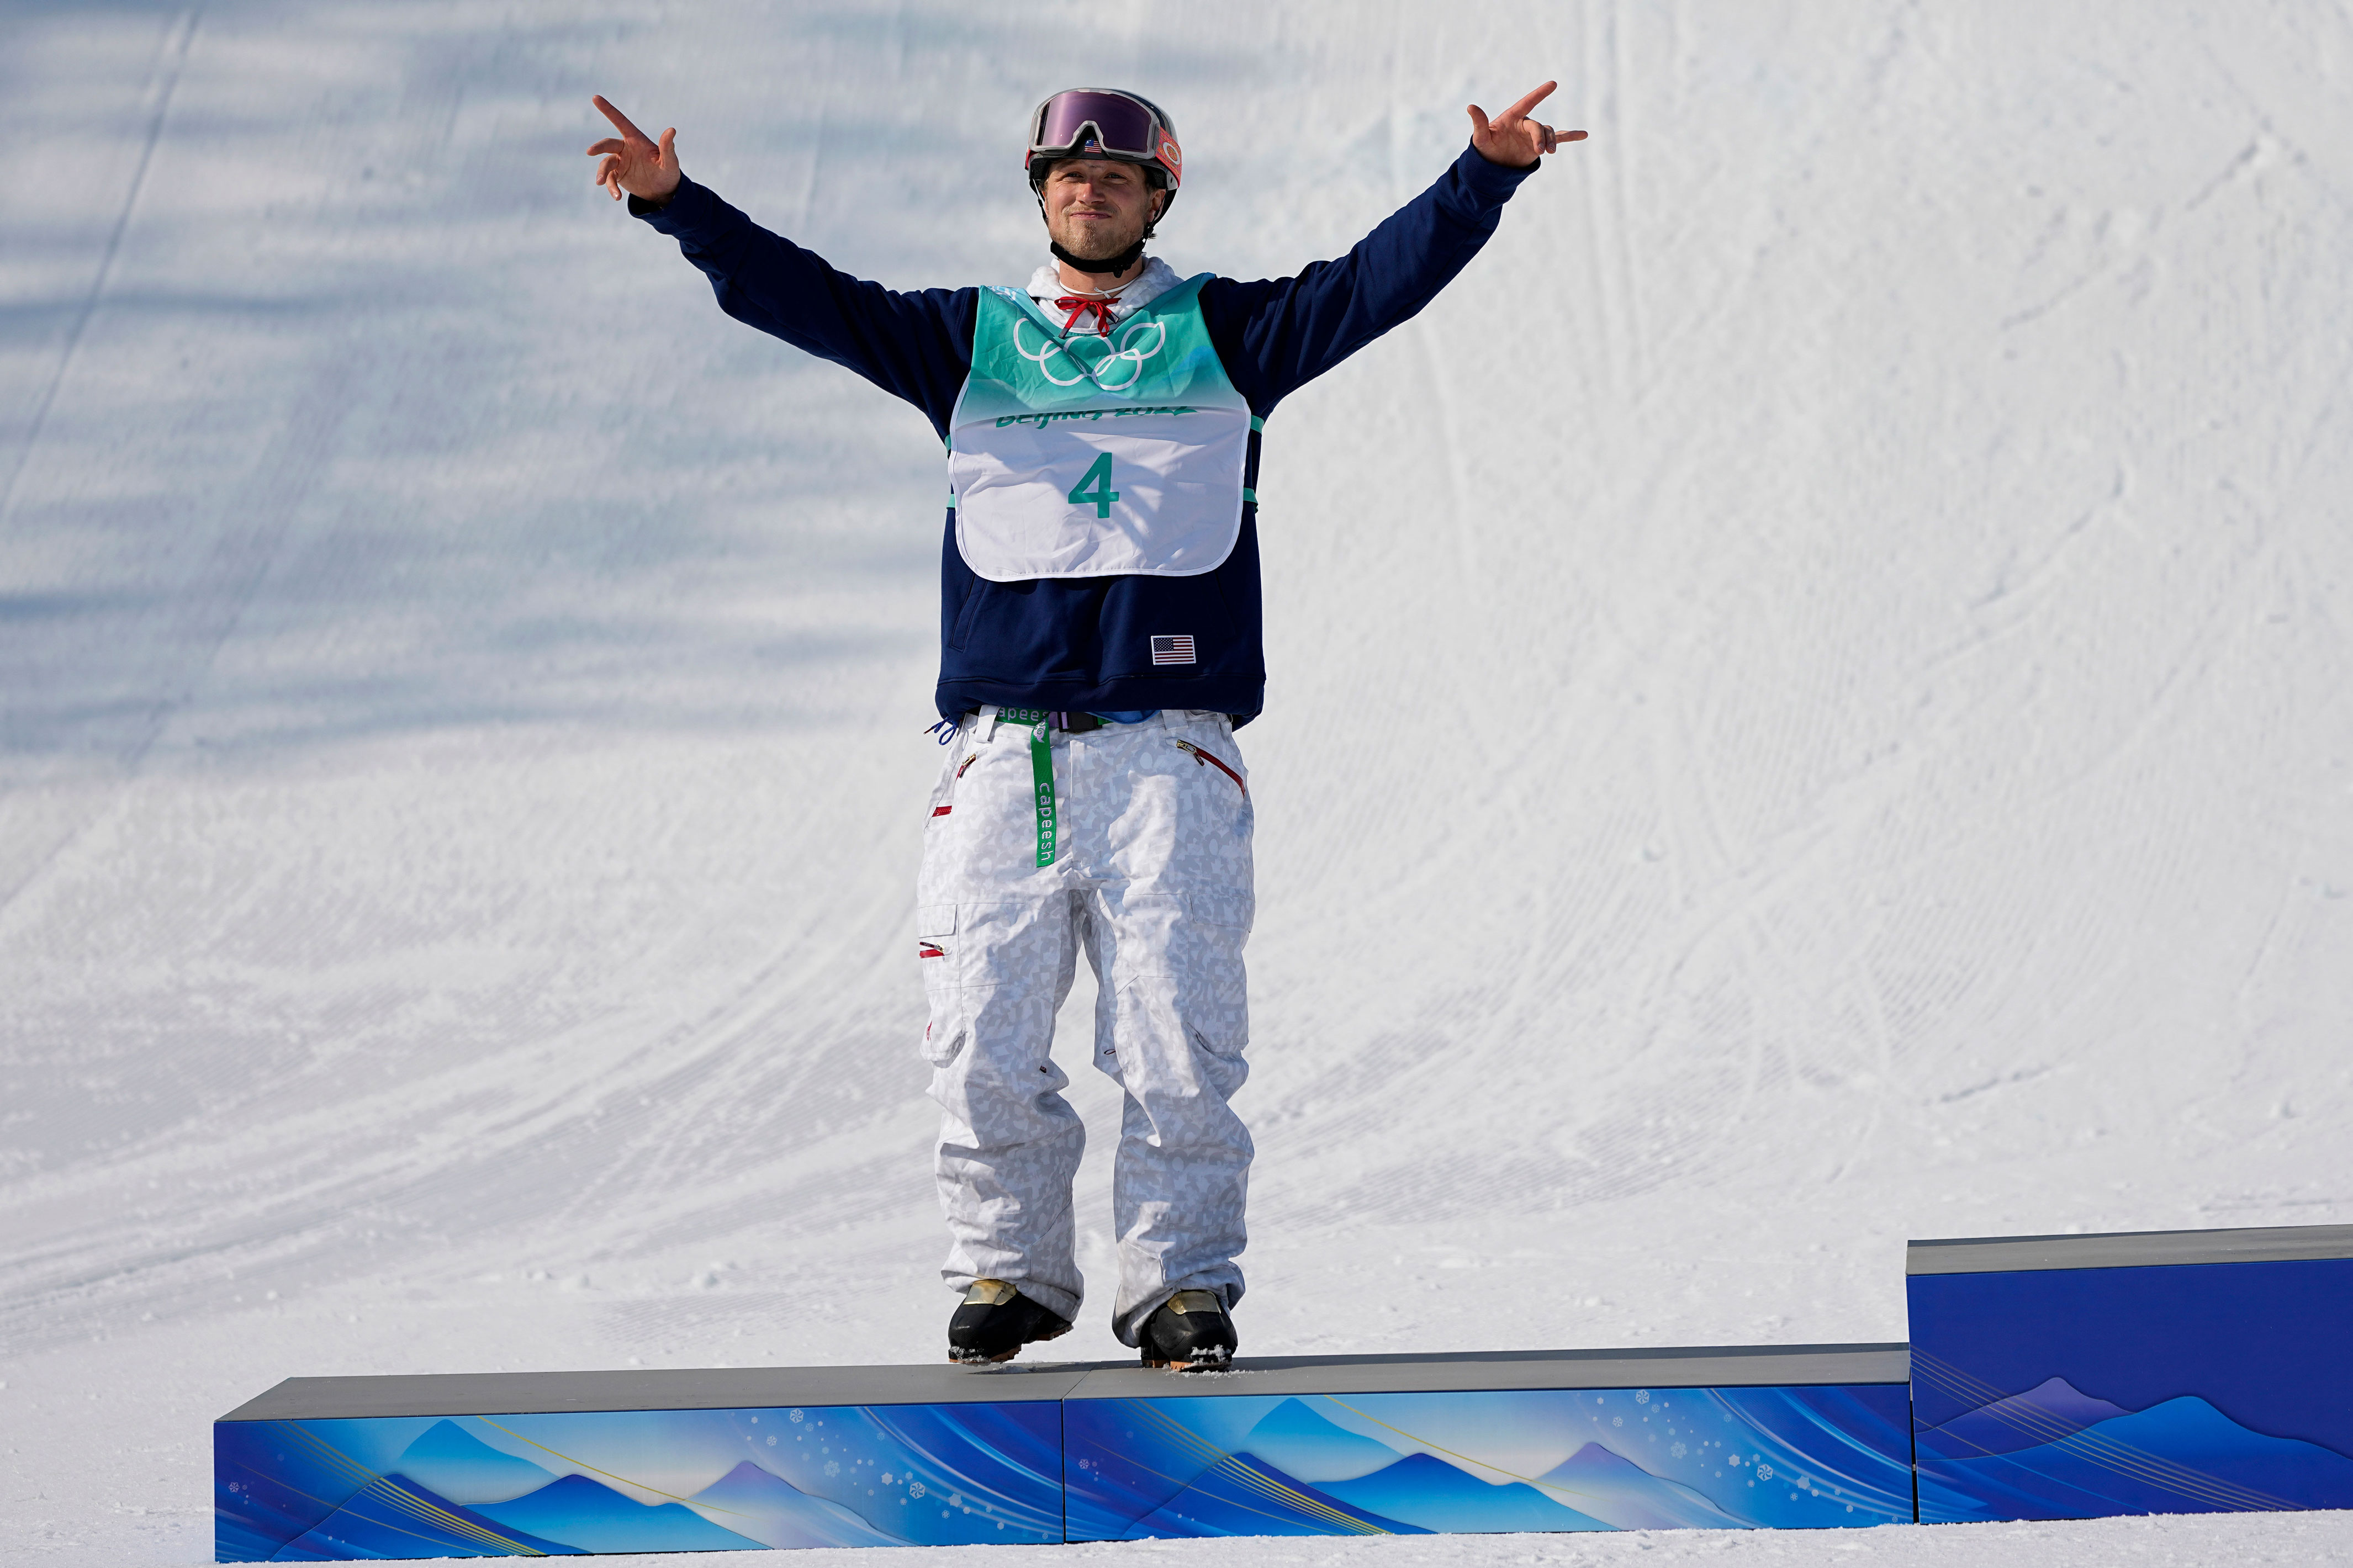 Silver medalist Colby Stevenson of the United States clinched silver in the men's freestyle skiing big air final on Wednesday.